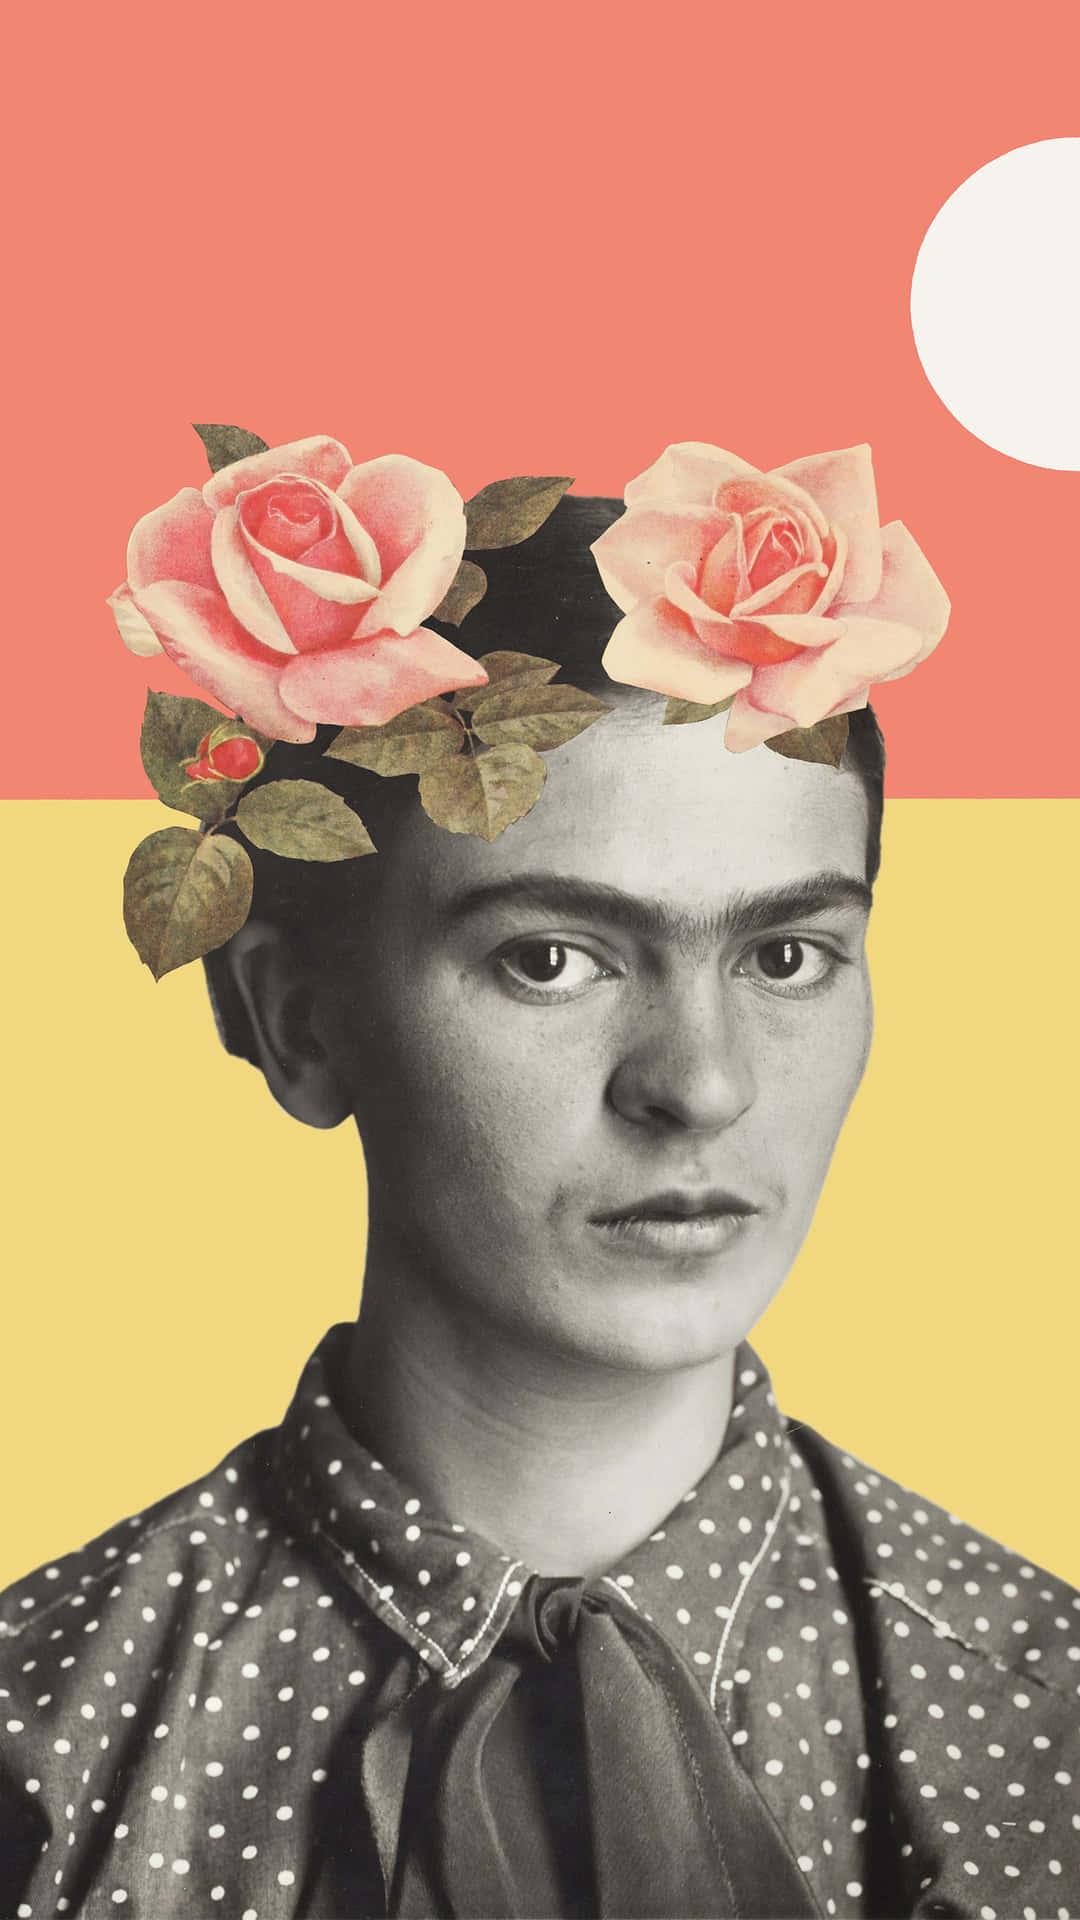 Frida Kahlo - A Portrait Of A Woman With Roses On Her Head Wallpaper